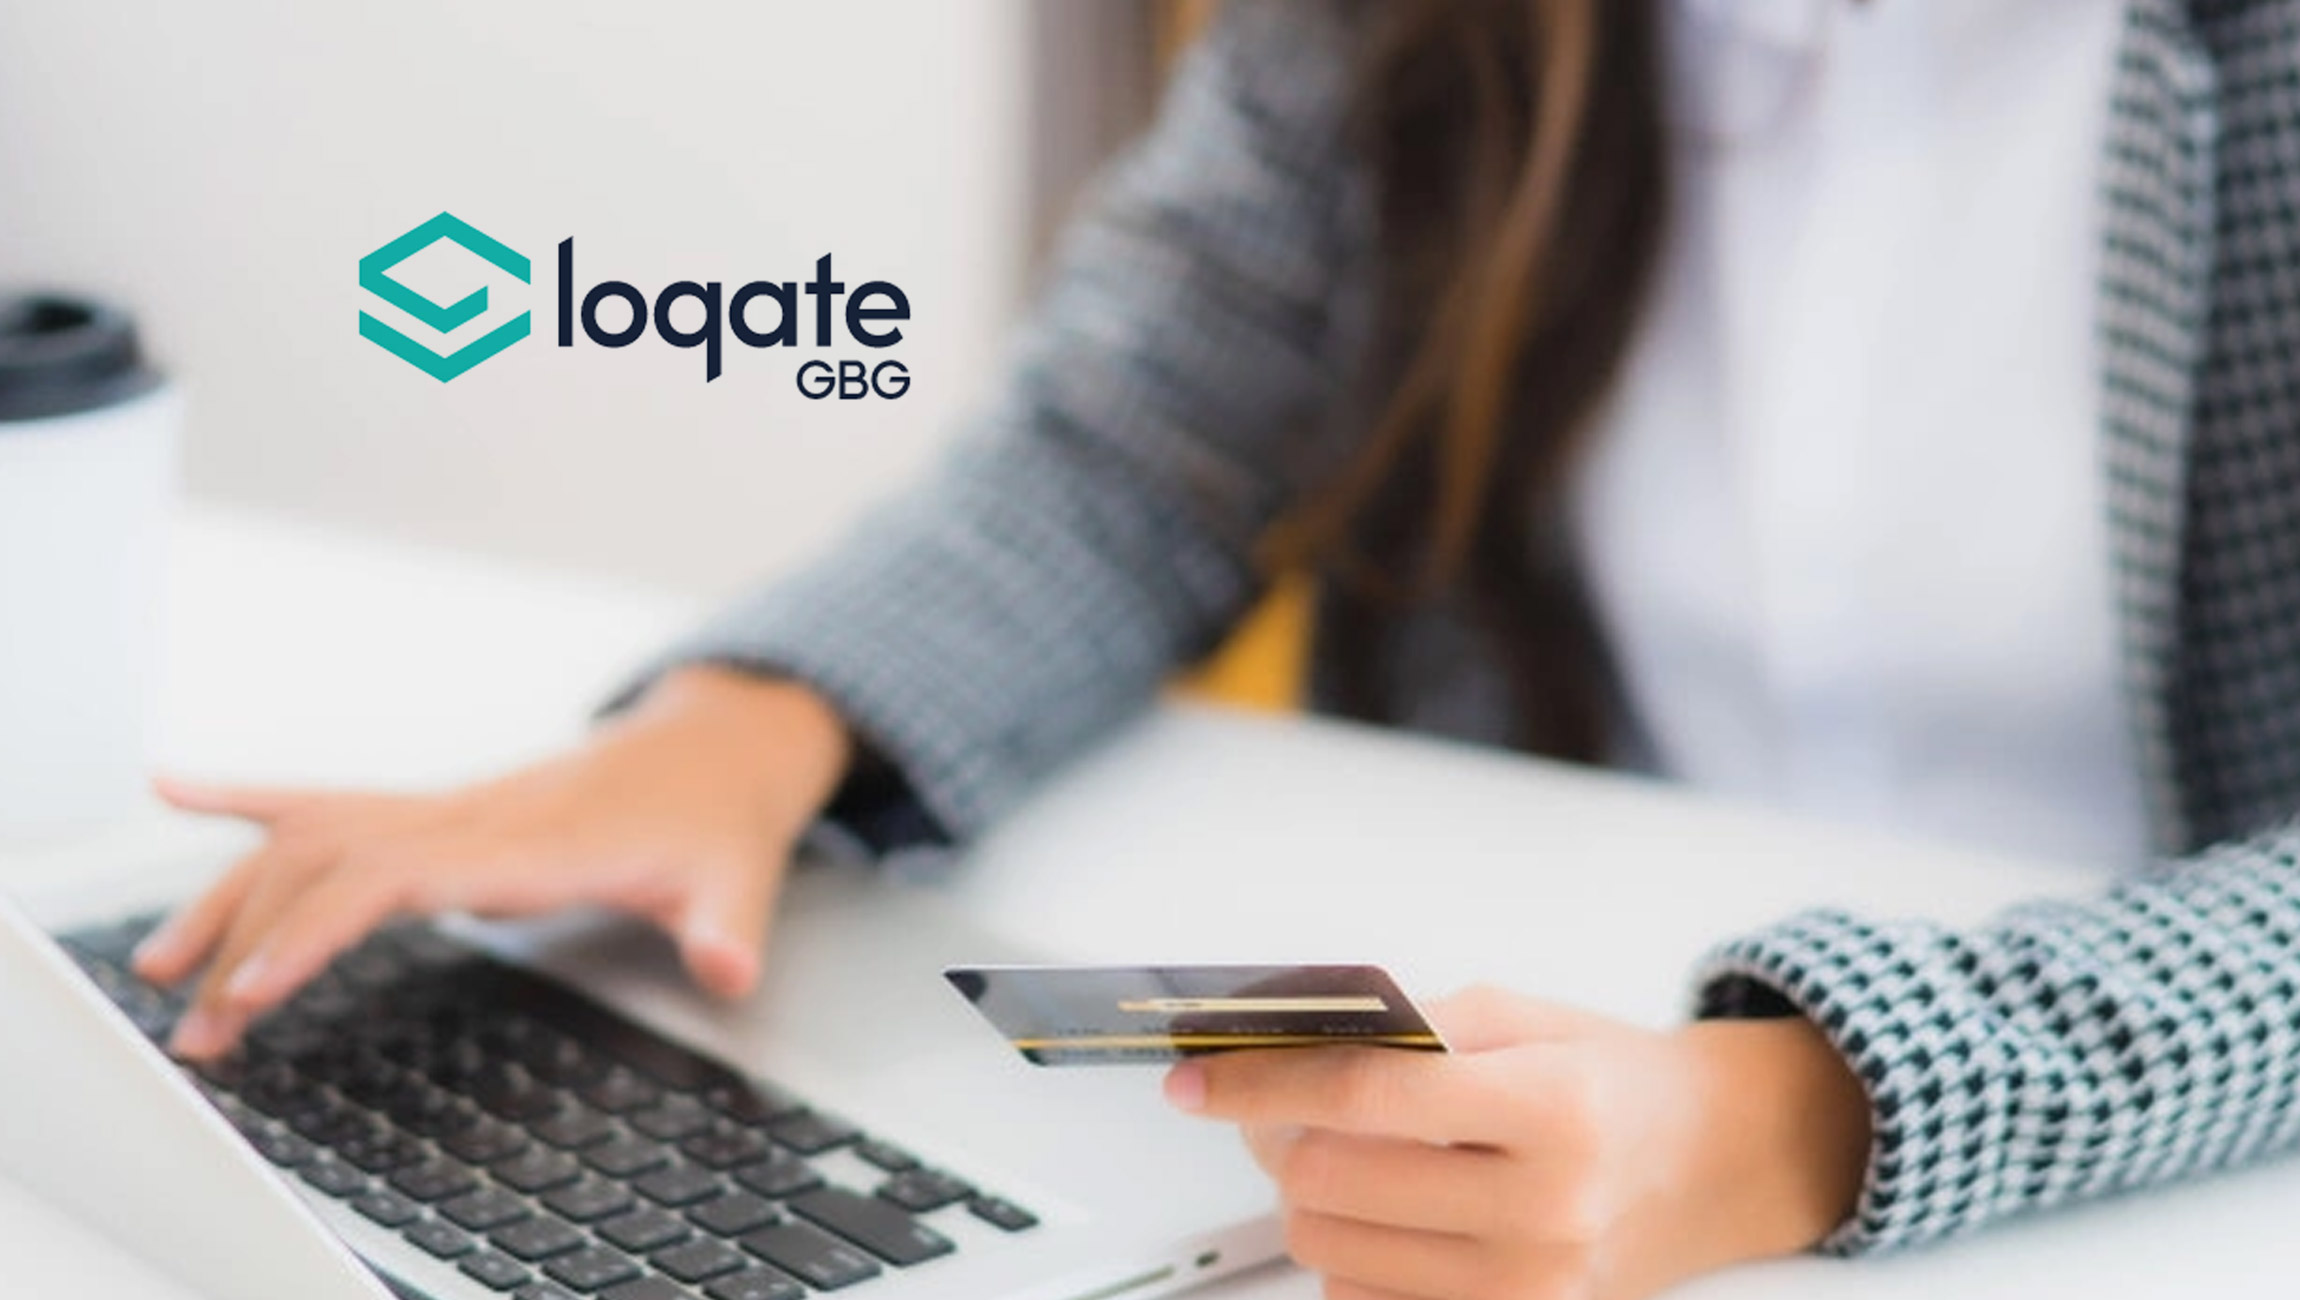 Deliver Direct to the Door of Millions of Customers in China With Loqate’s New Premium Address Data Set